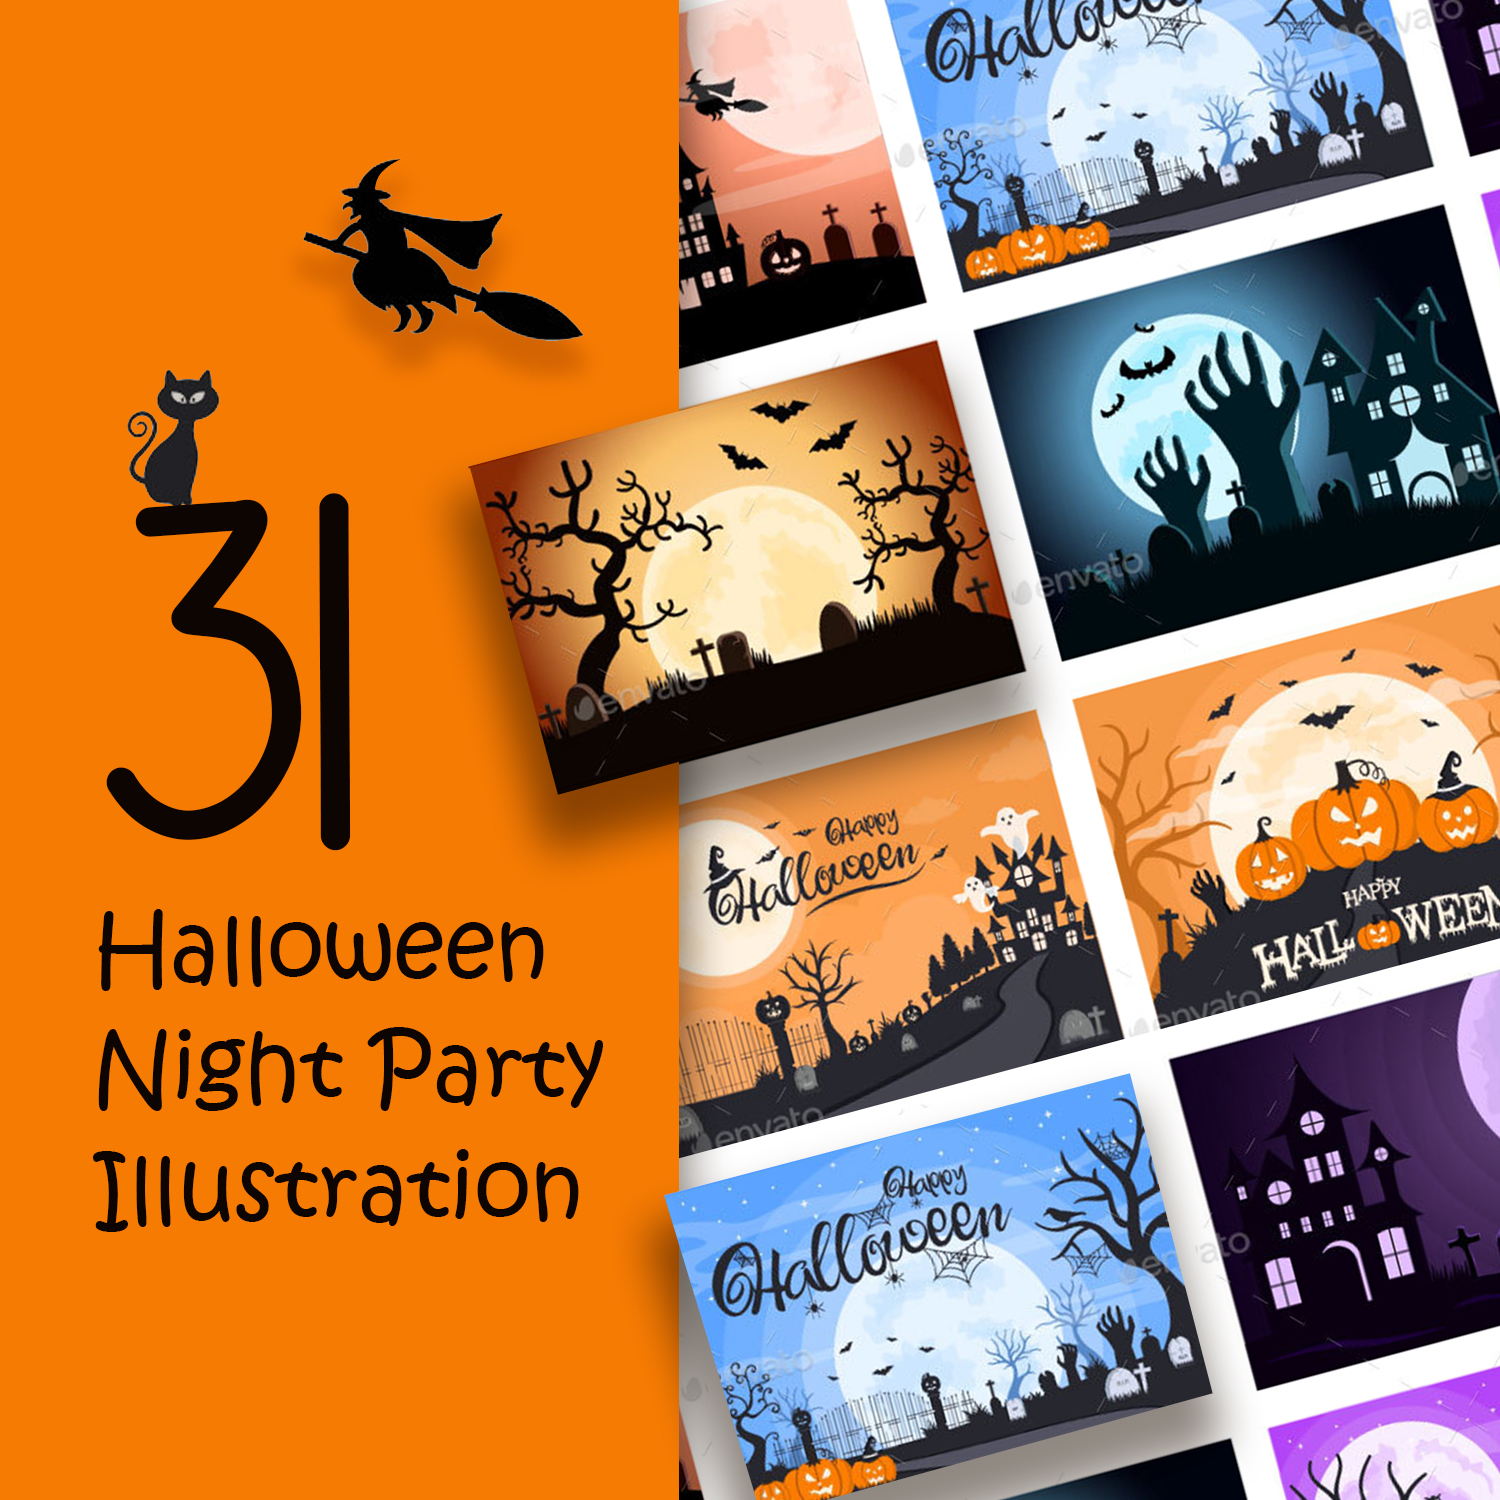 31 Halloween Night Party Illustration preview image.